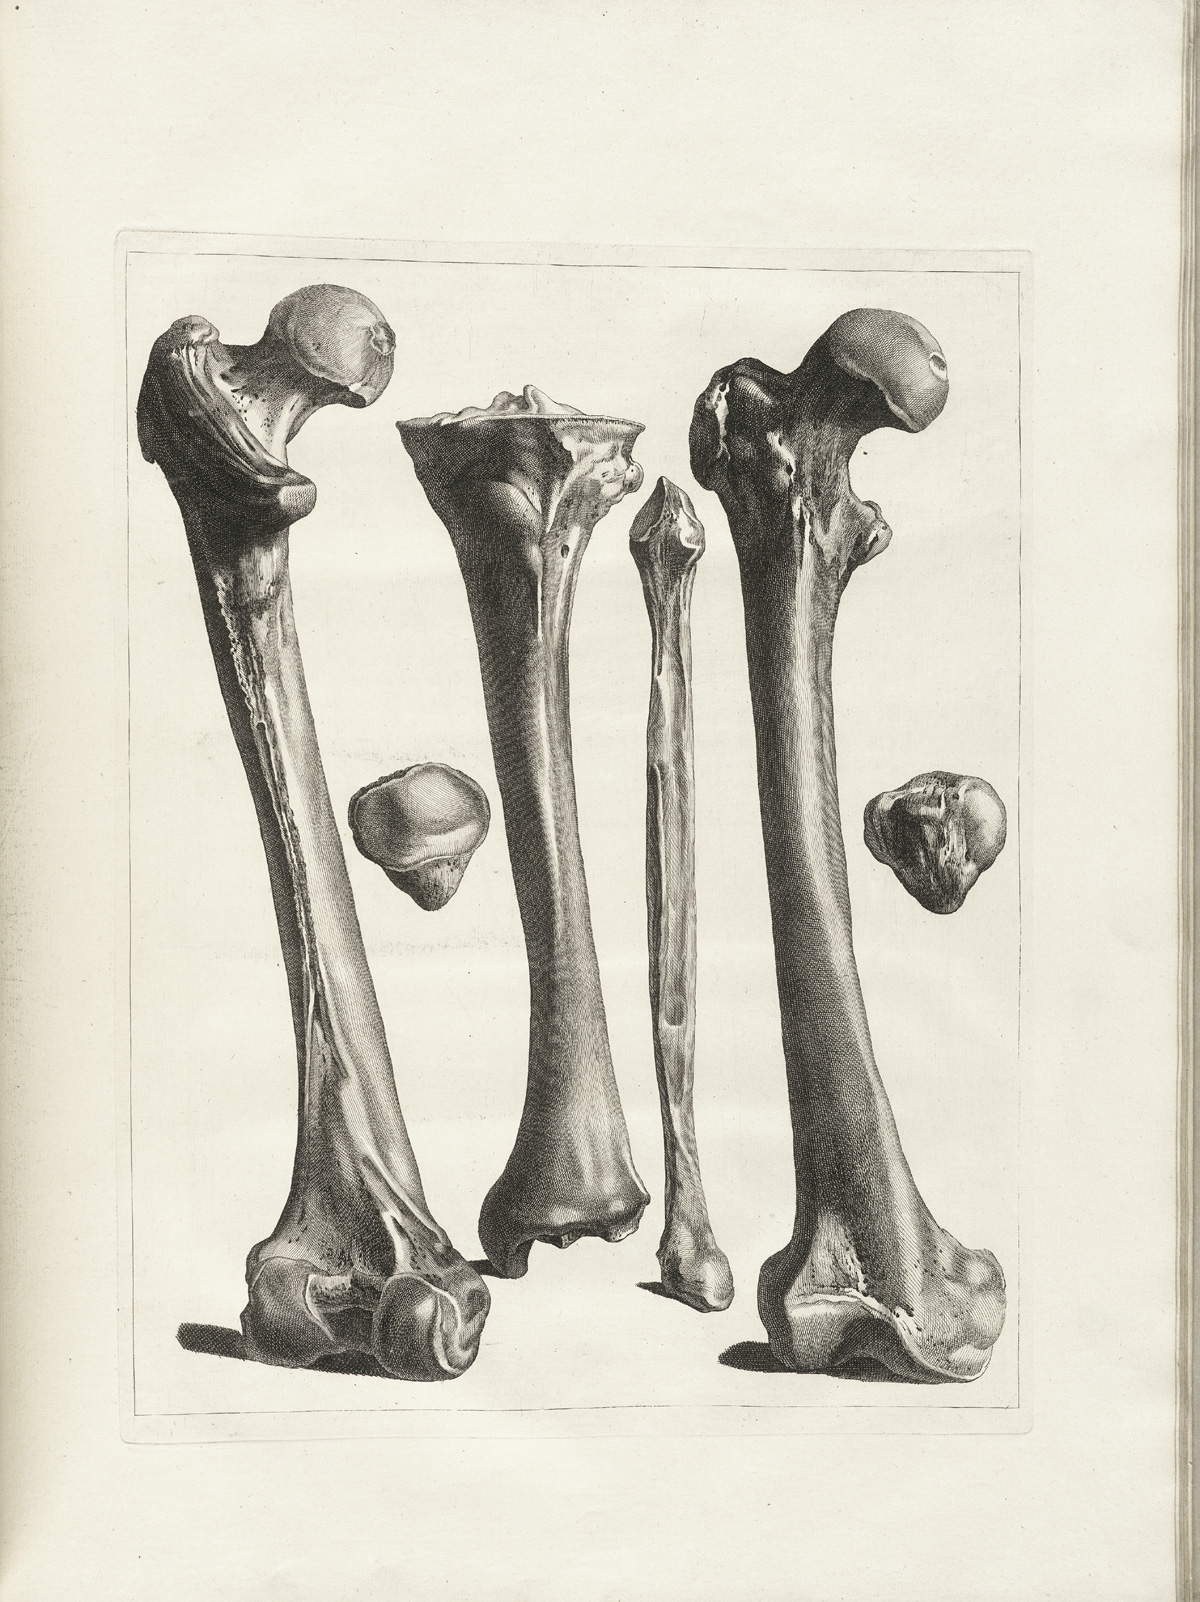 Engraving of the bones of the leg, including two views of the femur and the patella and one view each of the tibia and the fibula, from Jacques Gamelin’s Nouveau recueil d’osteologie et de myologie, NLM Call no.: WZ 260 G178m 1779.